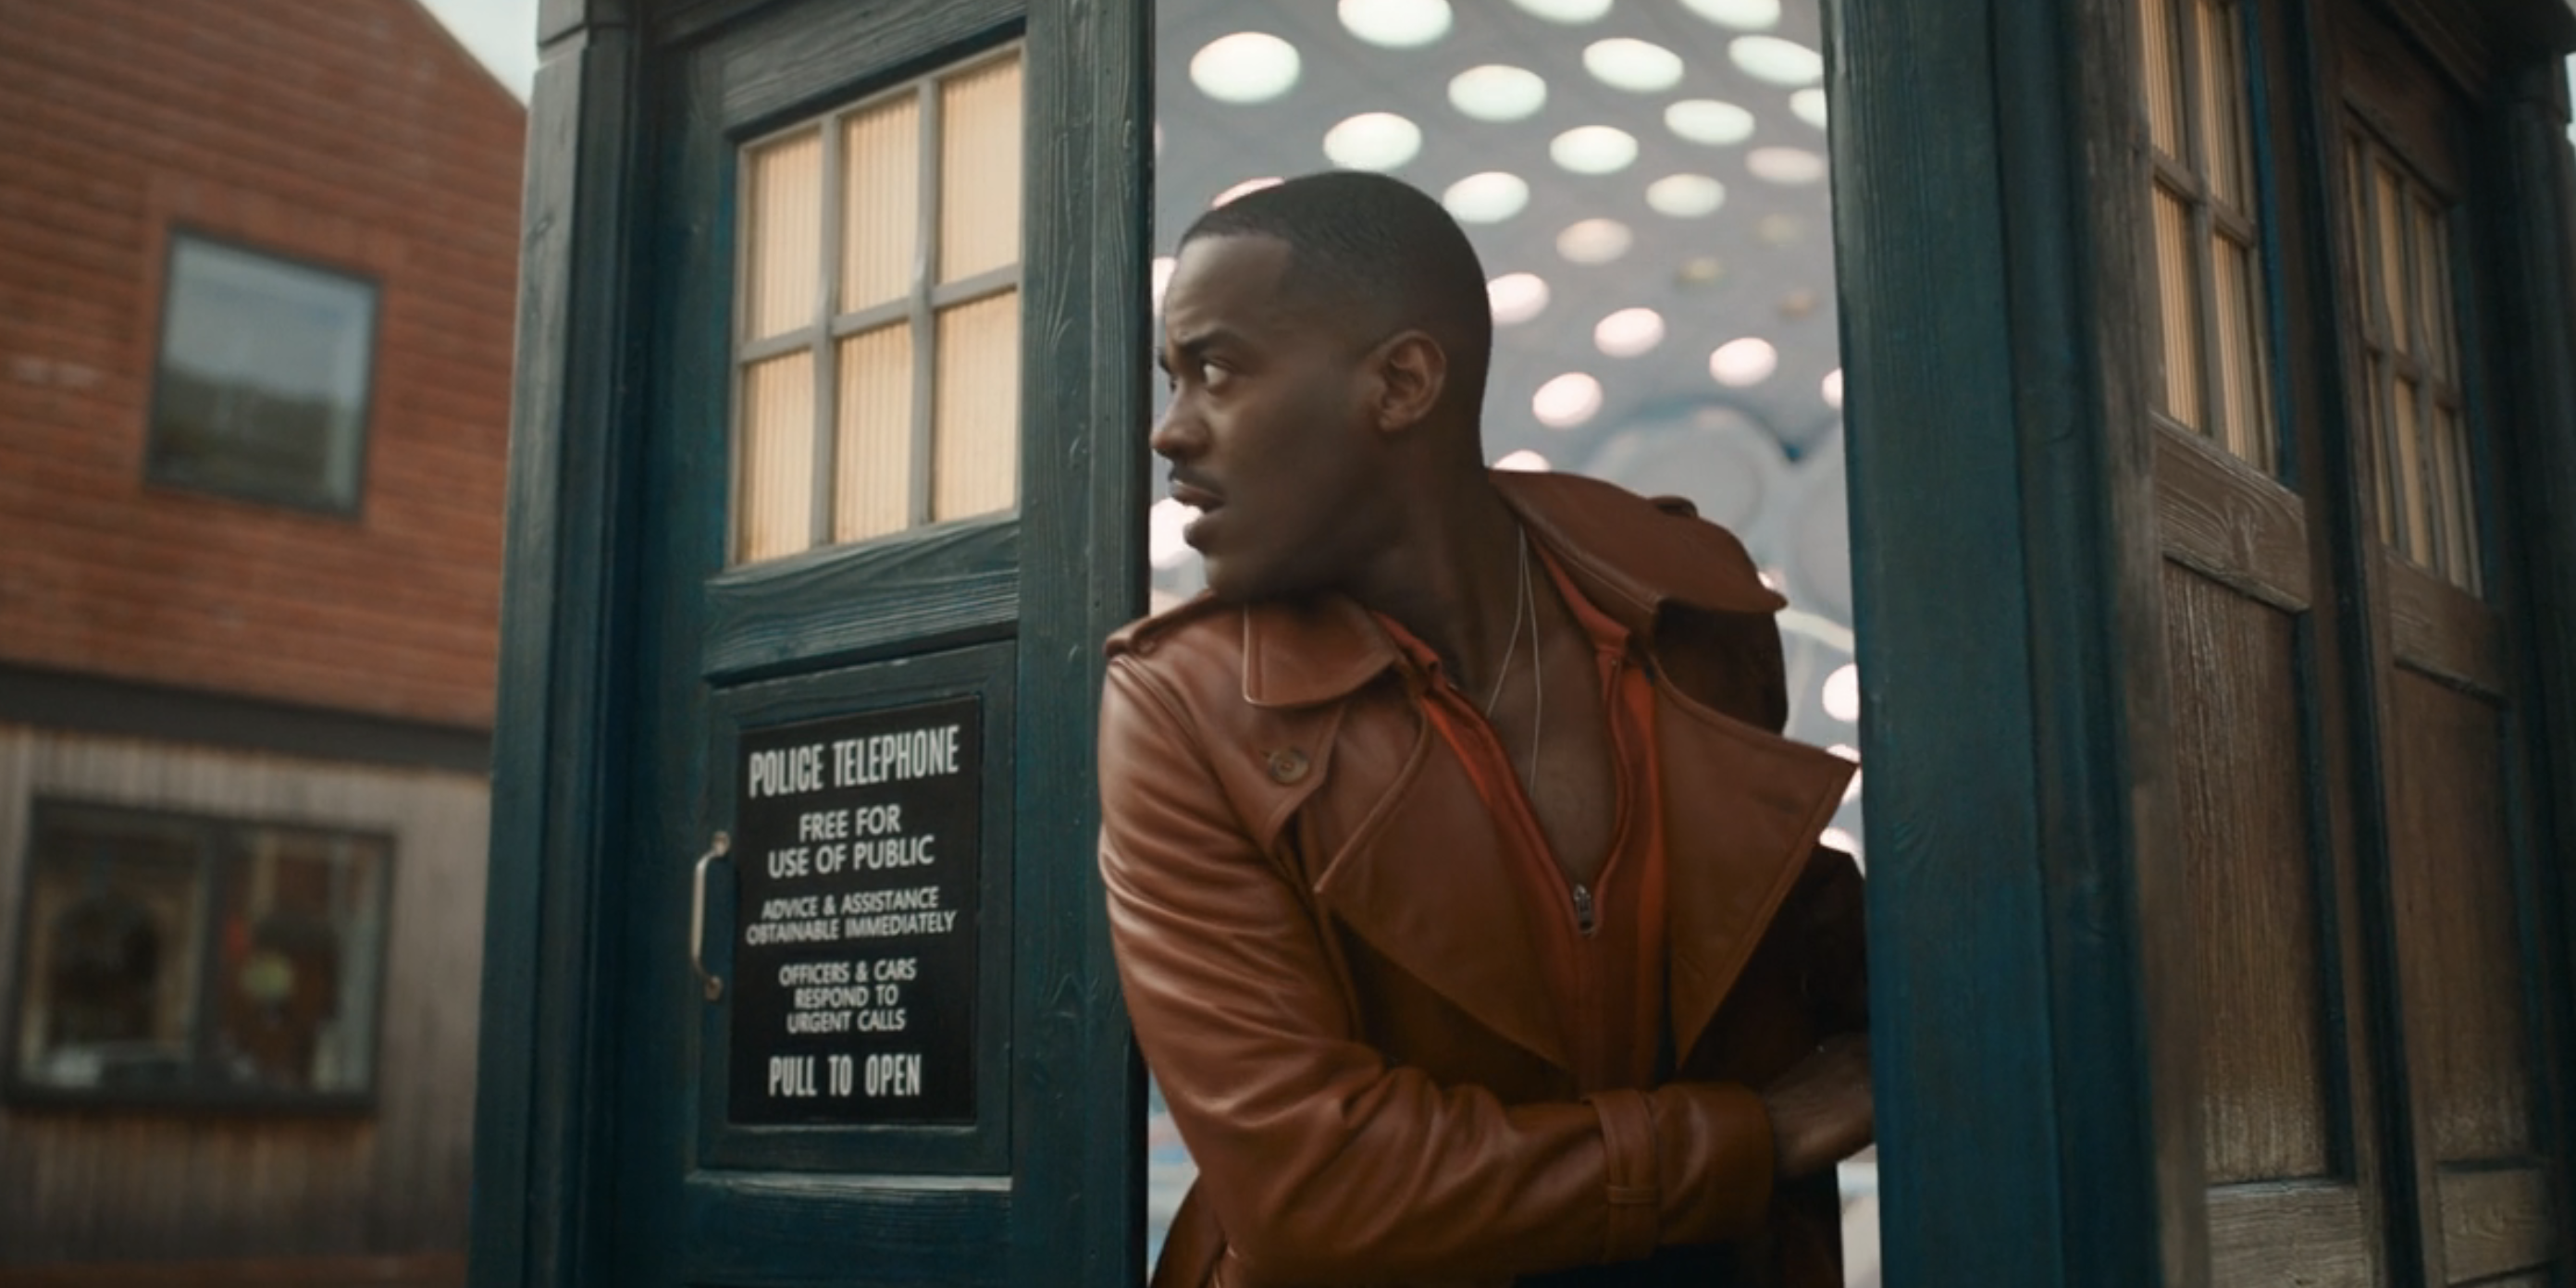 the Doctor in a leather jacket beside a British police box on a city street